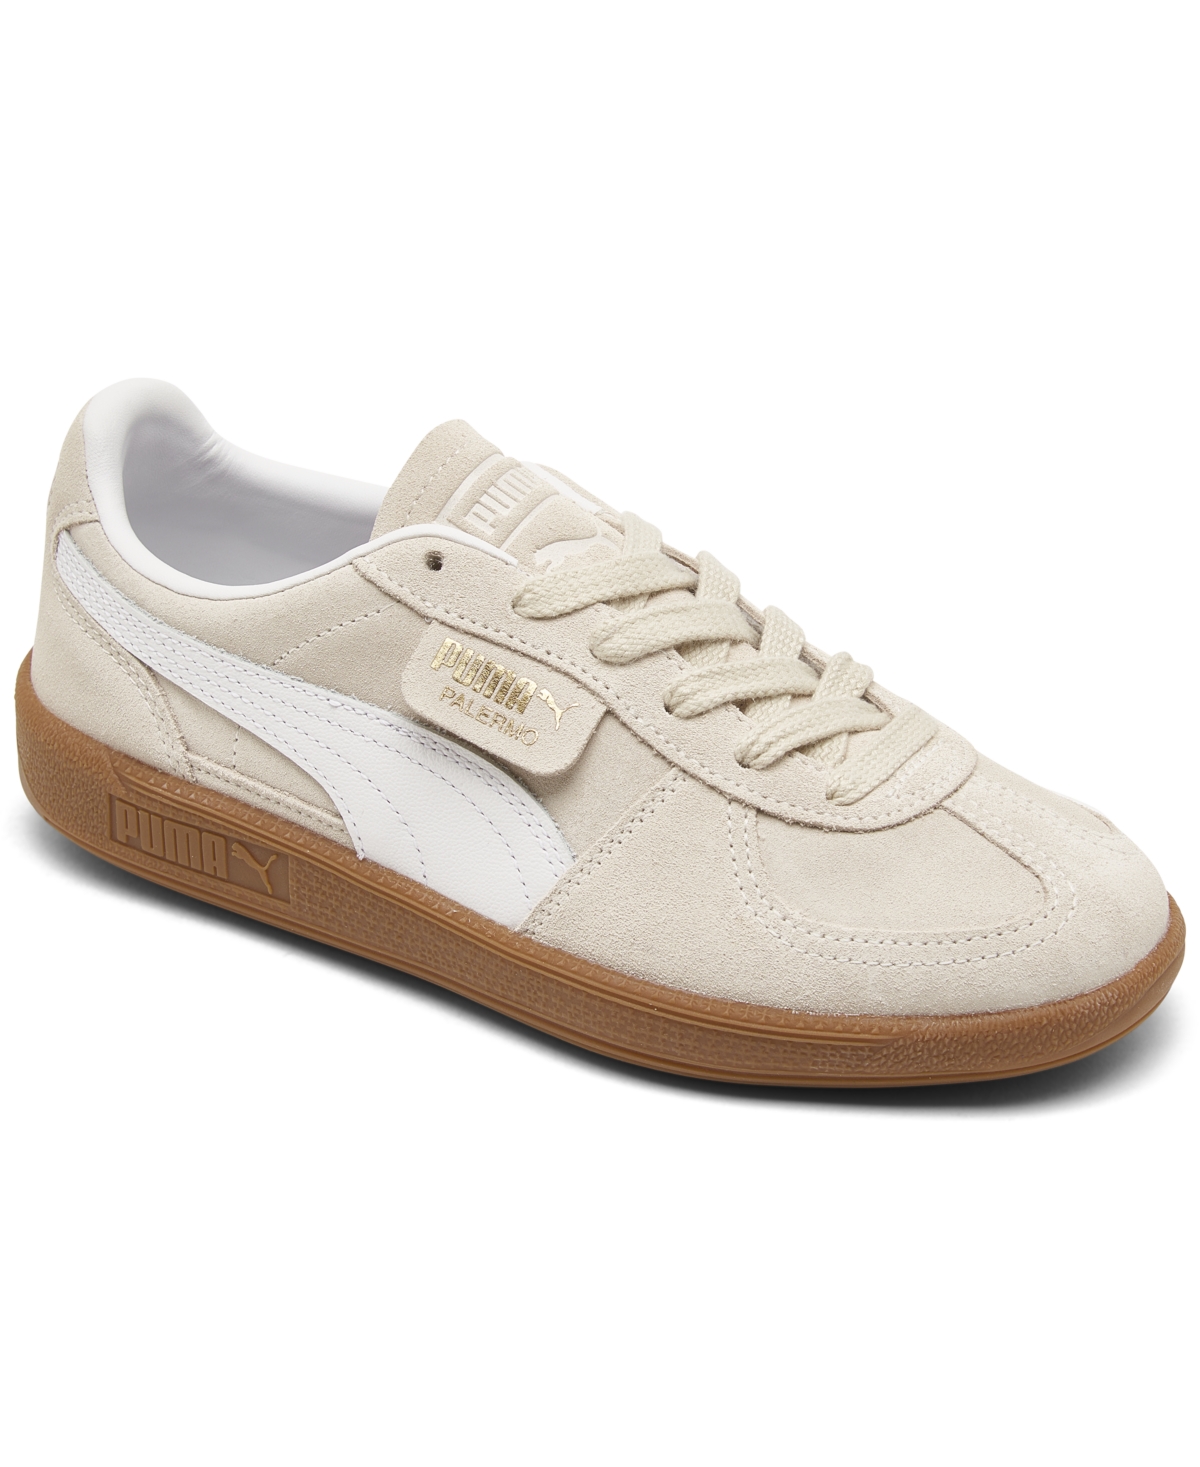 Women's Palermo Leather Casual Sneakers from Finish Line - Cream